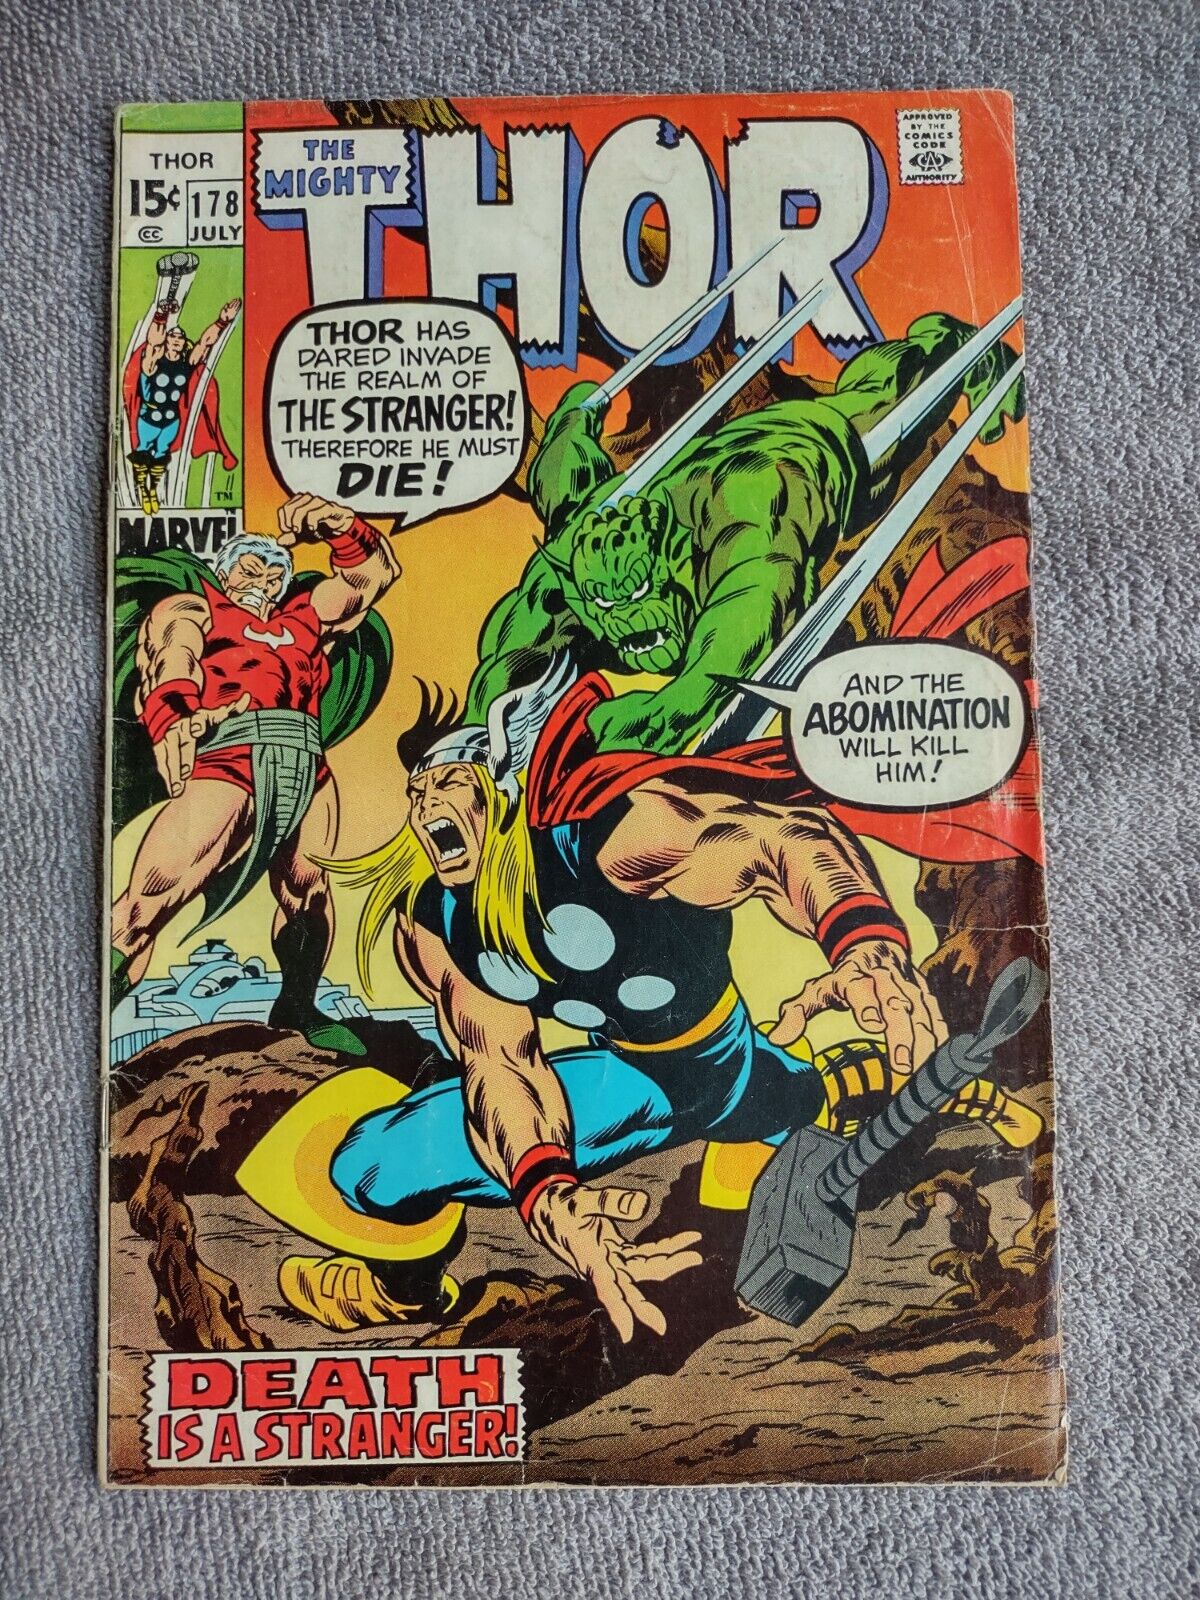 The Mighty Thor #178, Marvel Comics 1970 SILVER / BRONZE AGE